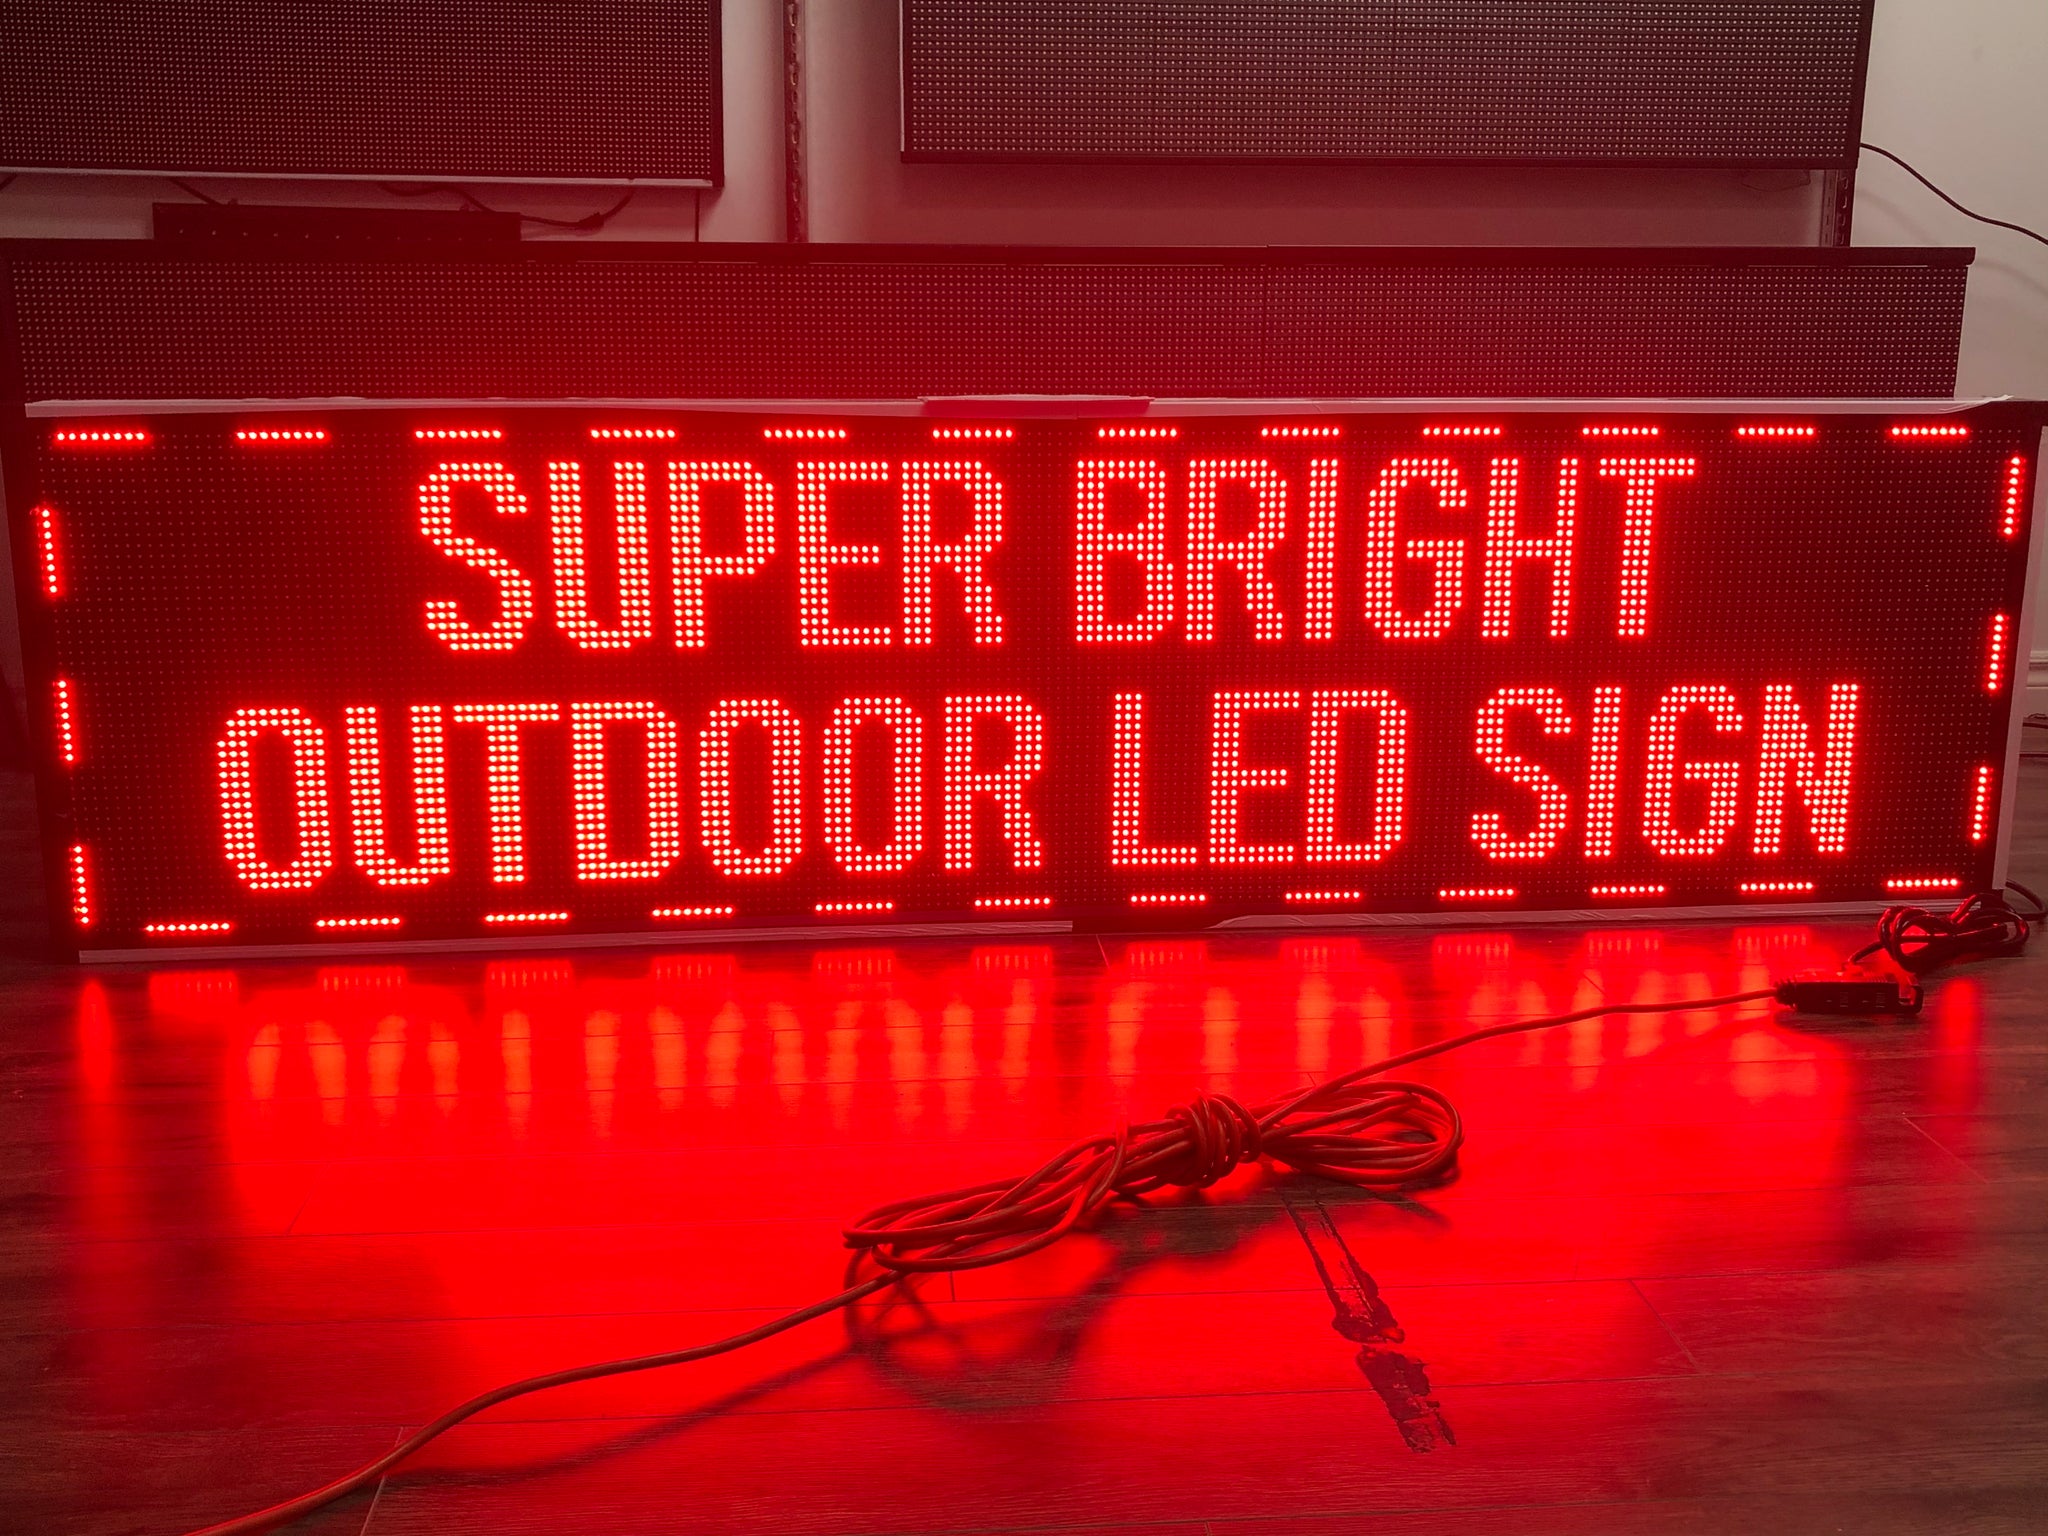 21 x 78 inch Ultra-bright Red Color Programmable LED Sign Water and Weather Proof for Outdoor Use